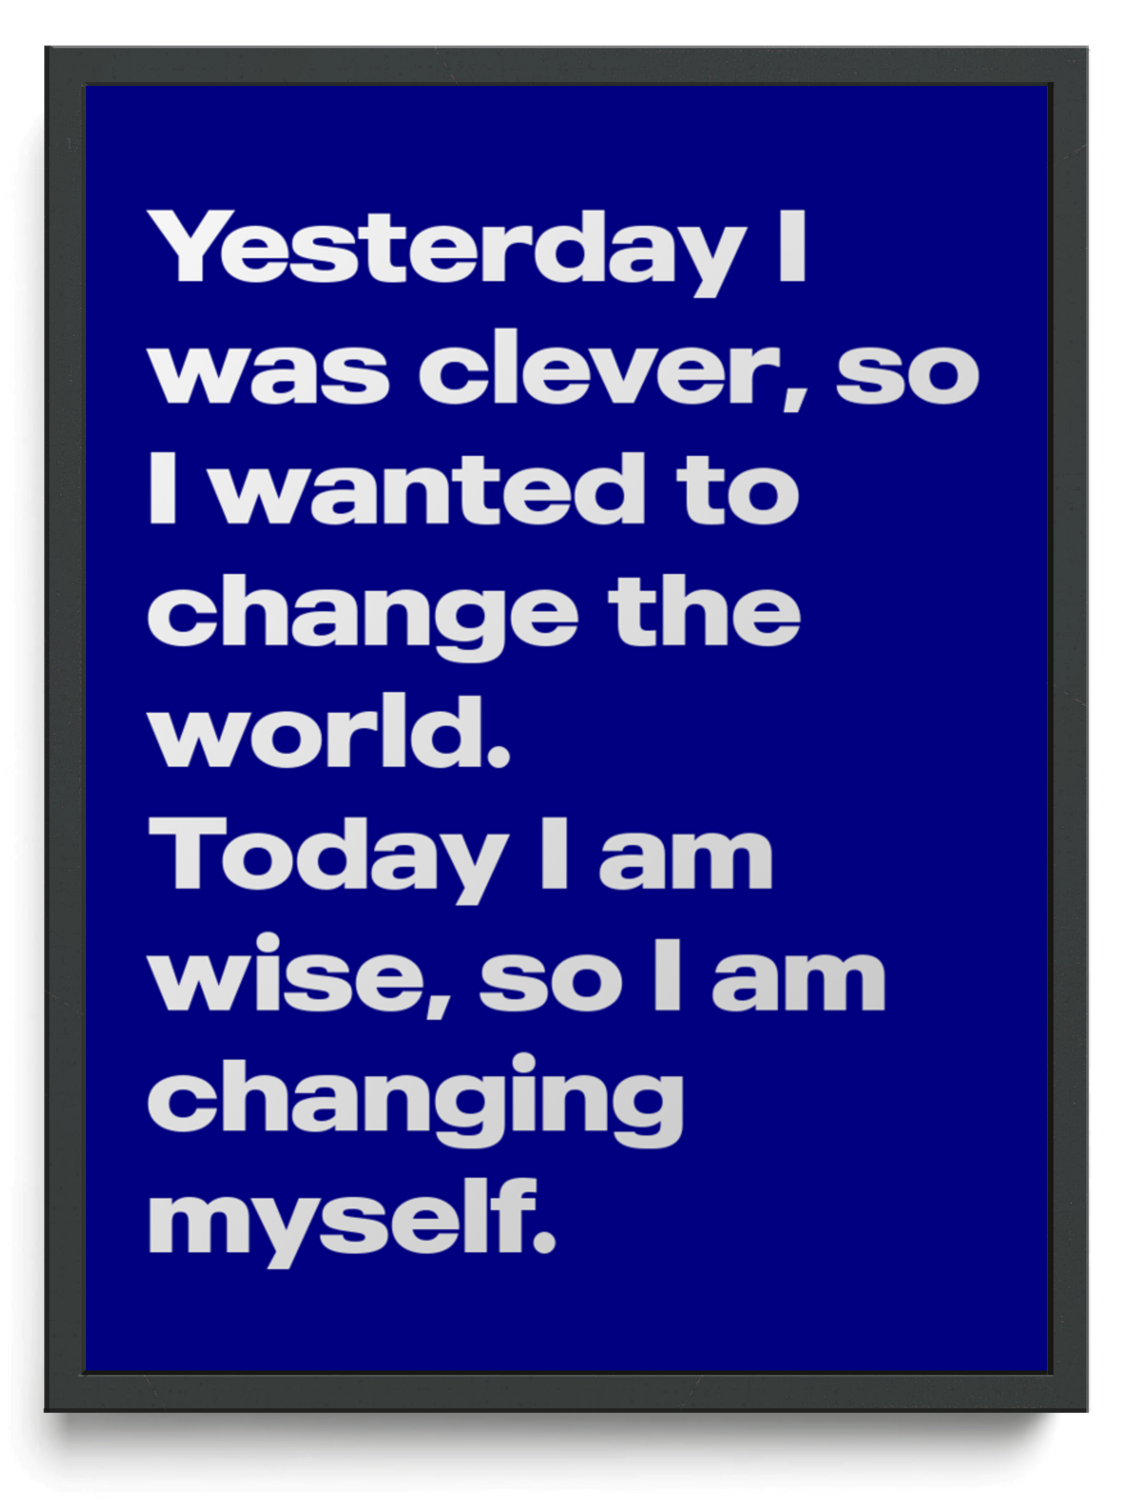 Yesterday I was clever, so I wanted to change the world. Today I am wise, so I am changing myself. framed typographic print